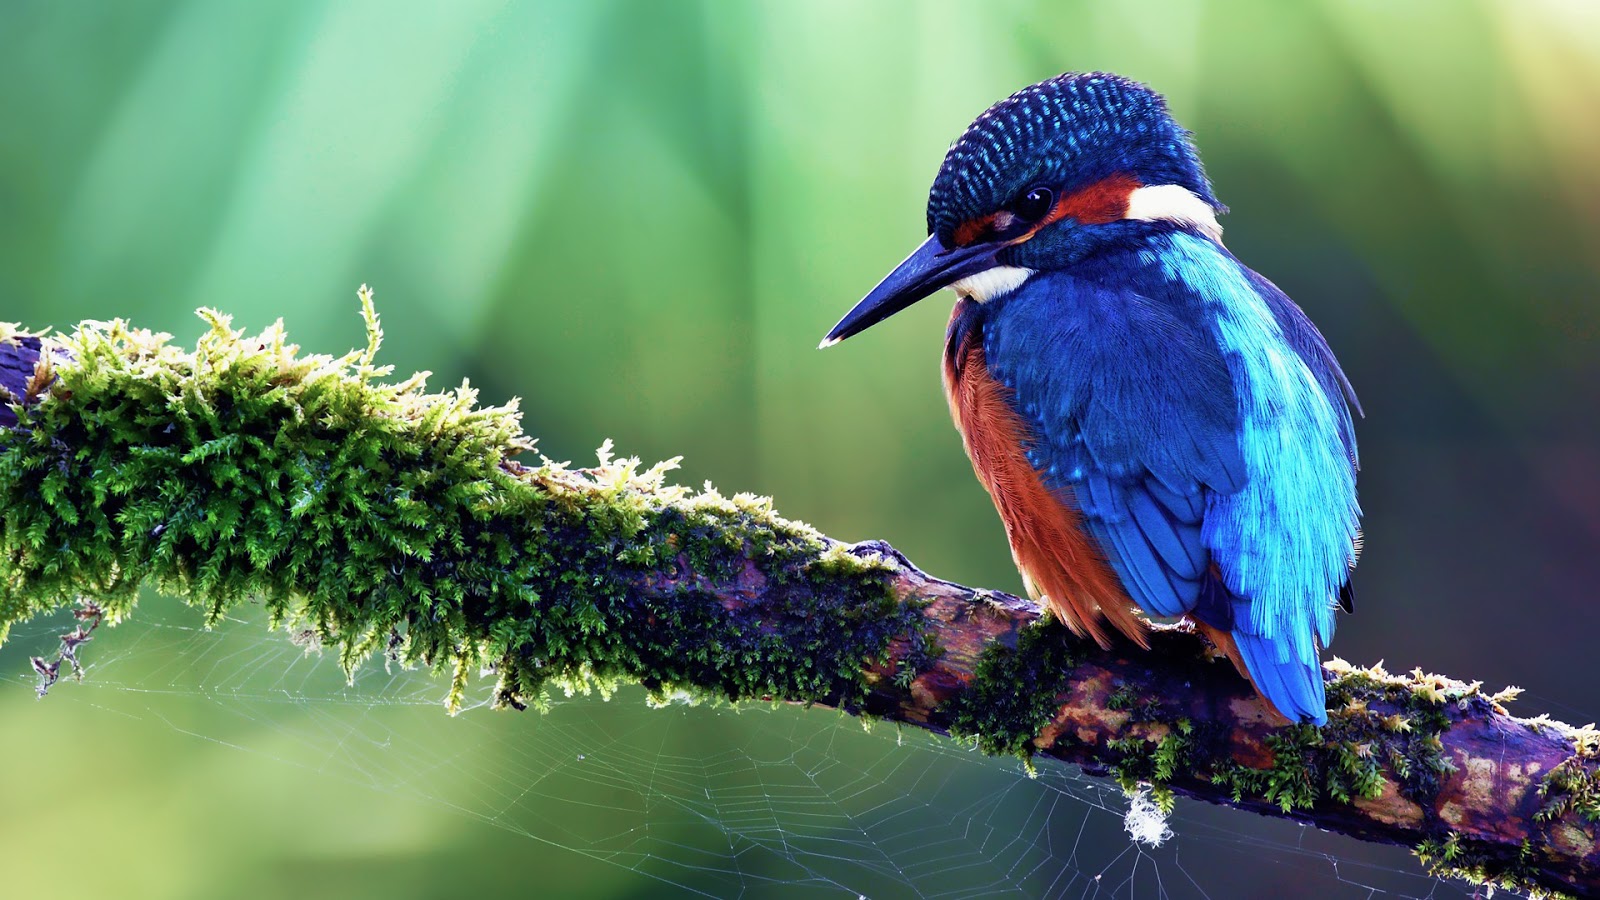 Wallpapers: Beautiful Birds photos images pictures 50 HD Wallpapers